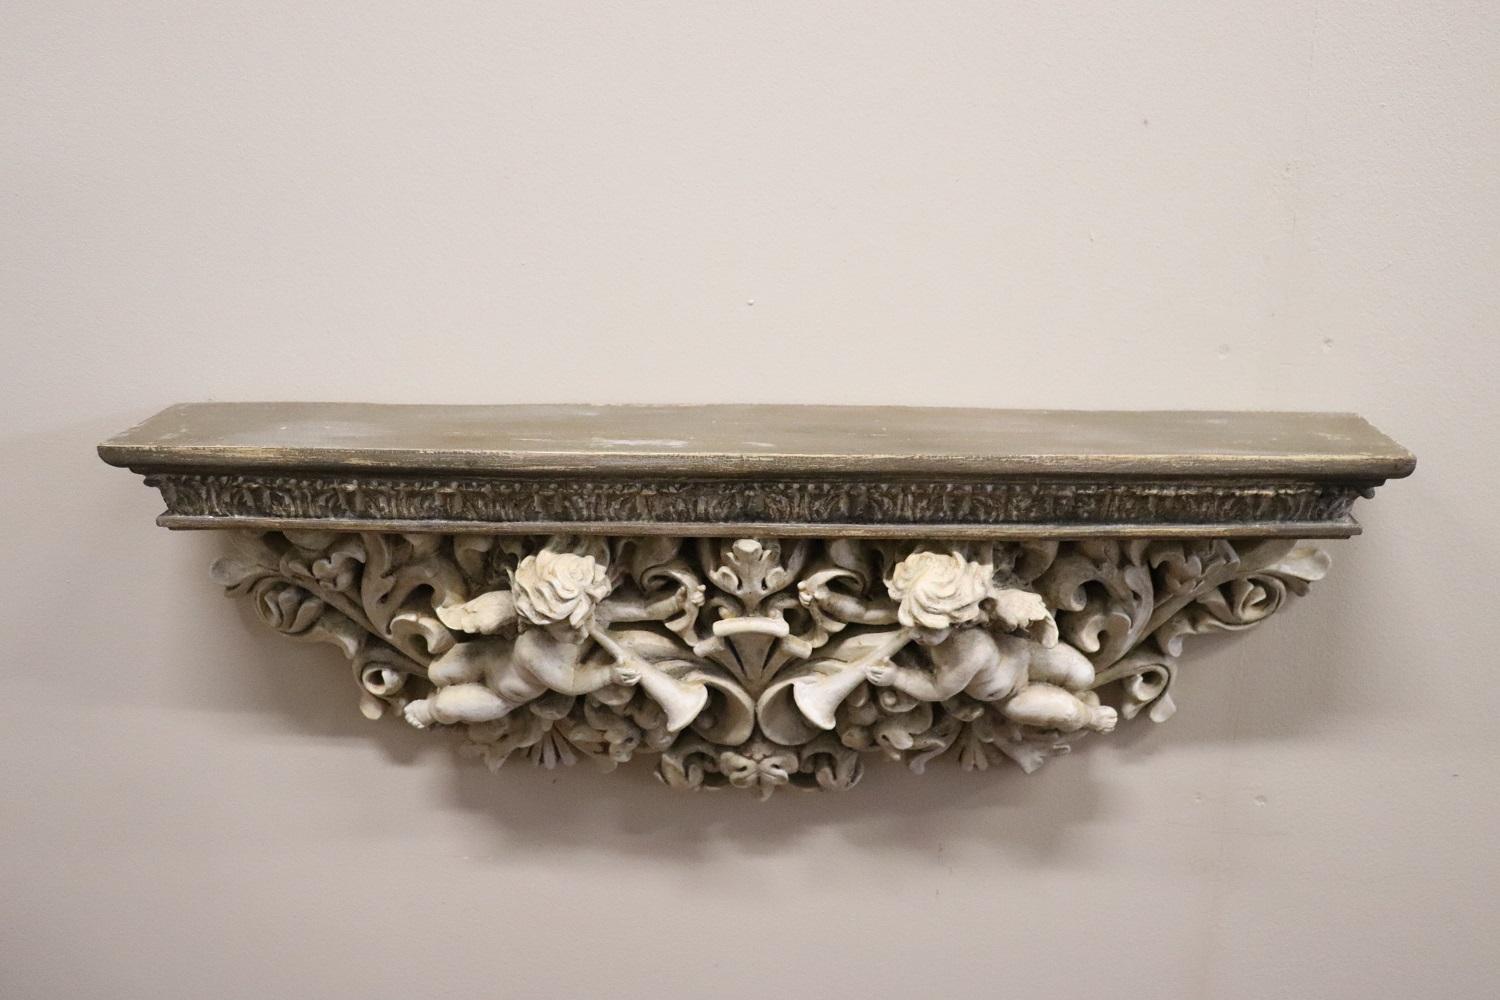 Refined Italian sculpture in composite material recently manufactured. A beautiful wall shelf characterized by an elaborate Baroque style decoration with curls and volutes, in the center two angels playing. The shelf was painted with a particular